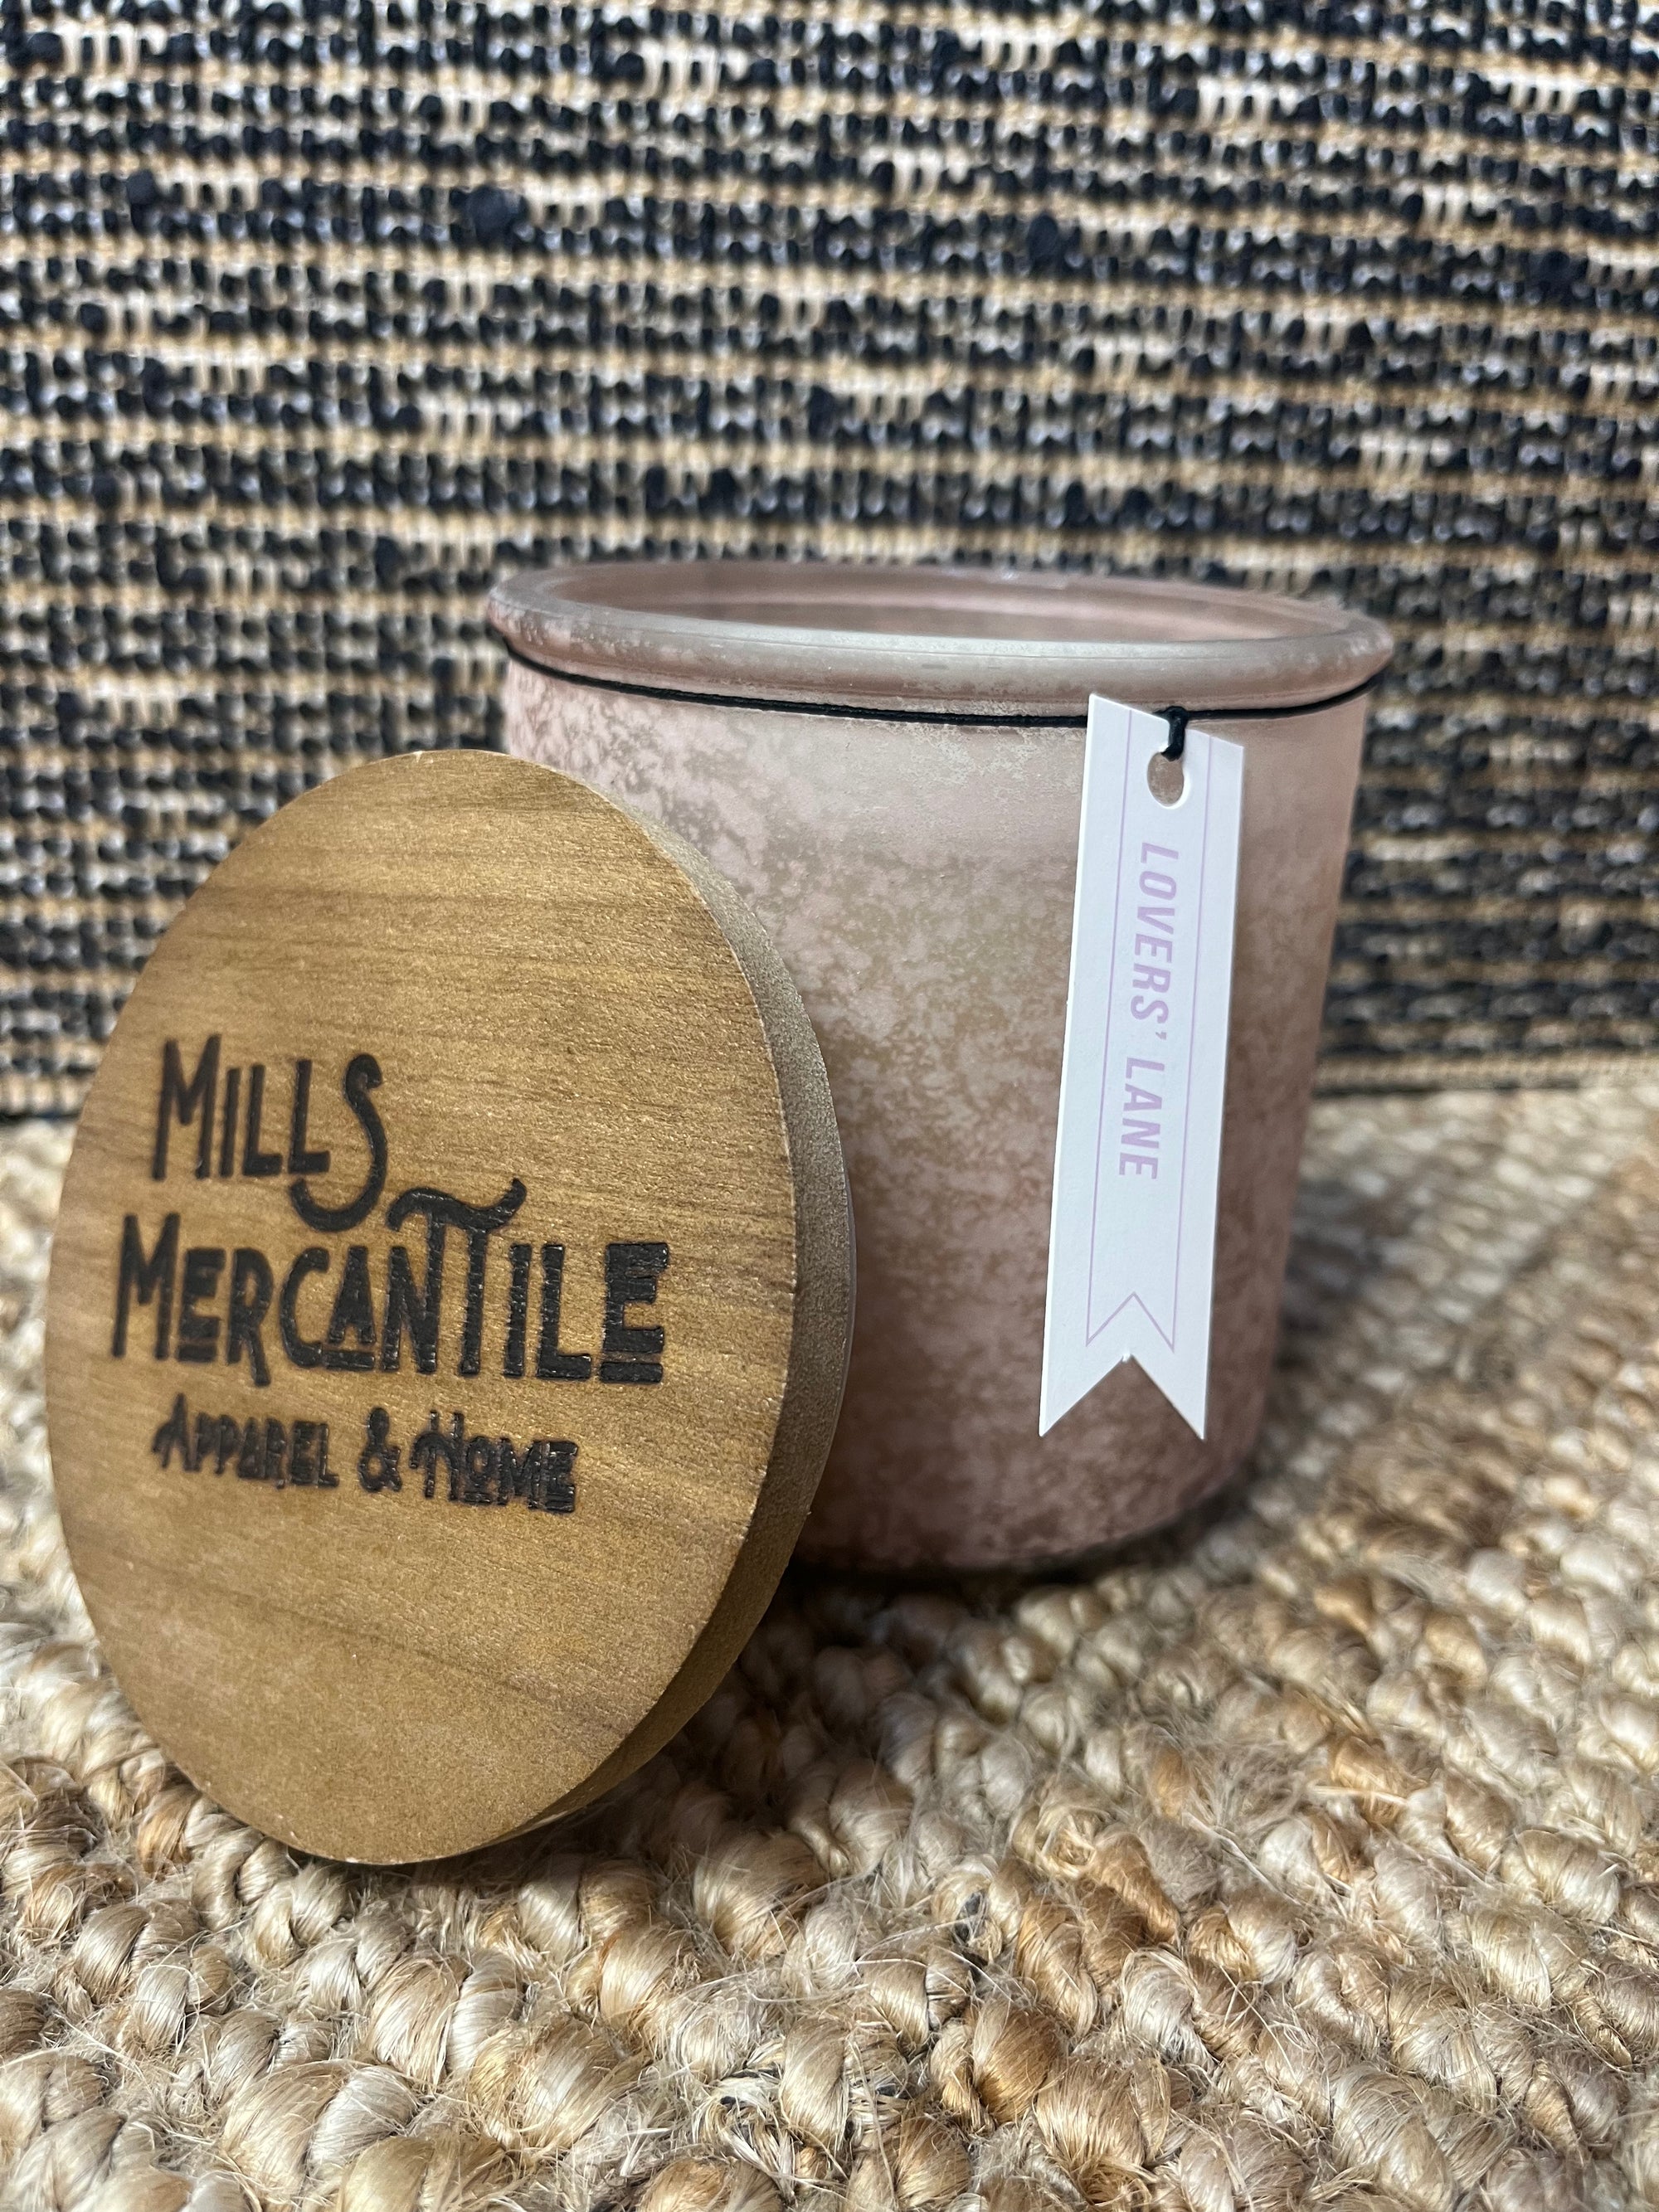 Lover's Lane Scent - Mills Mercantile Candle